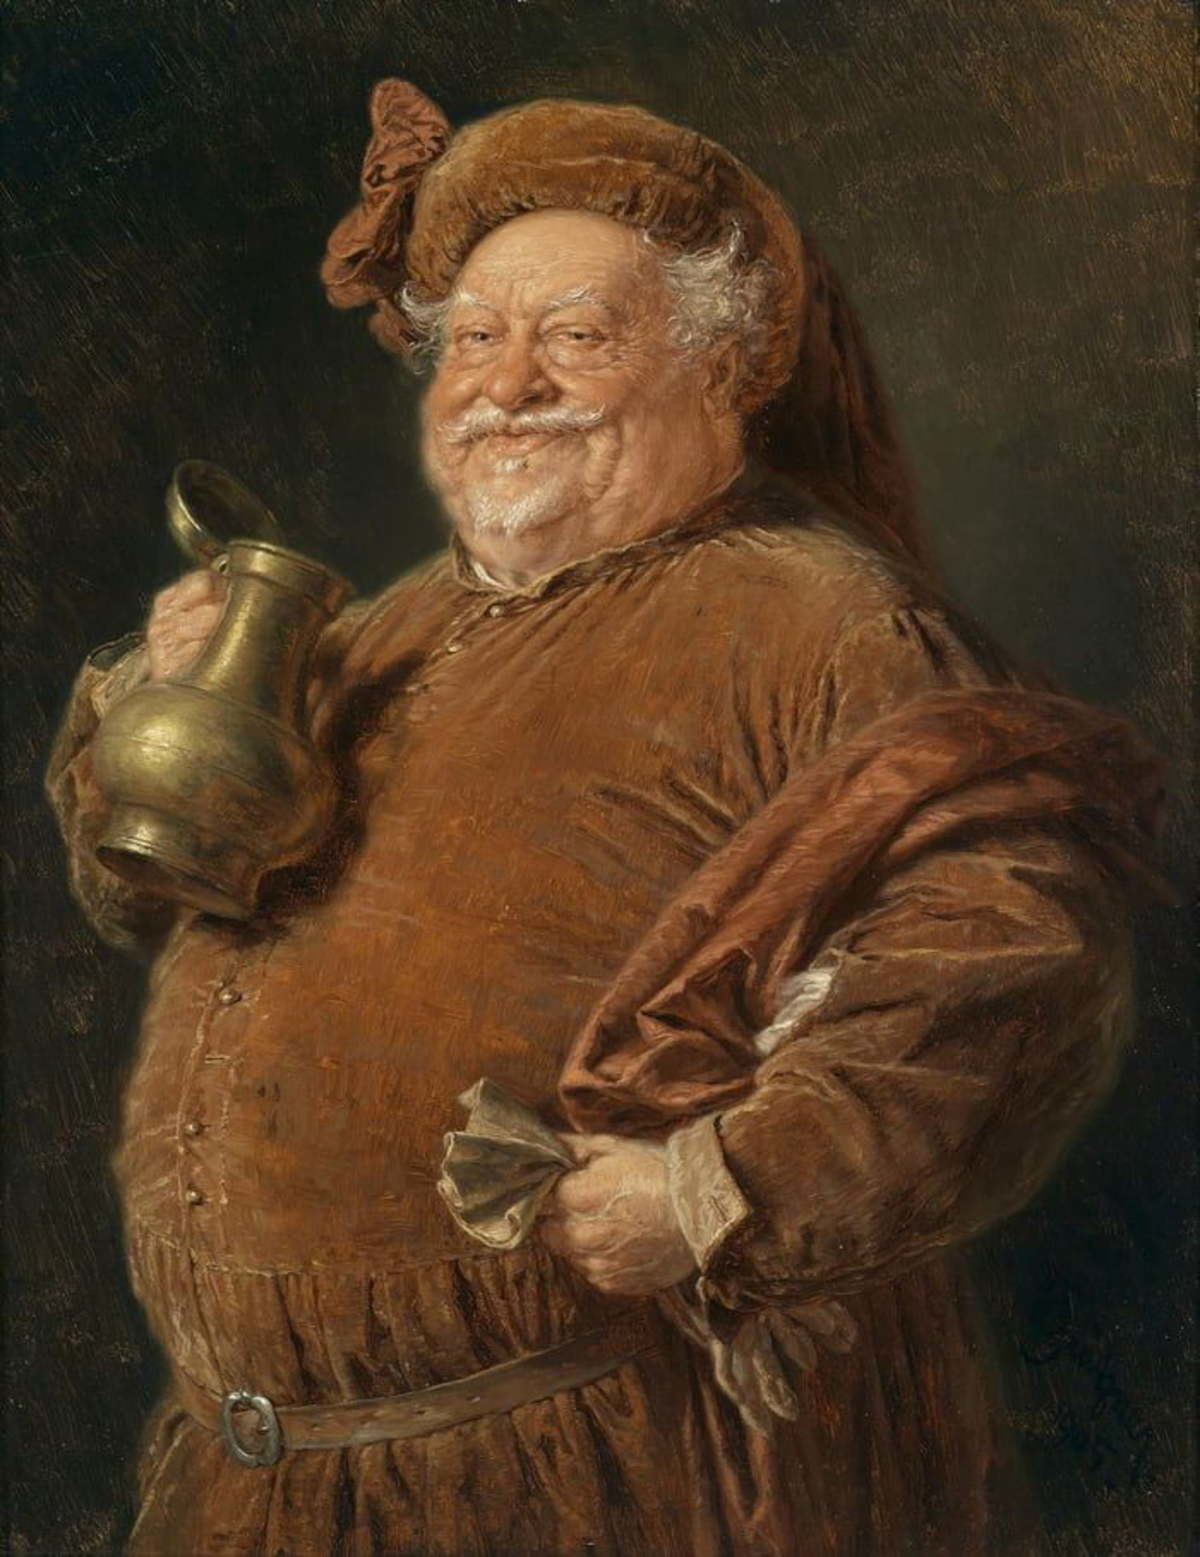 art. join list: ArtAttack (372 subs)Mention History.. Look at This fat smug son of a bitch.